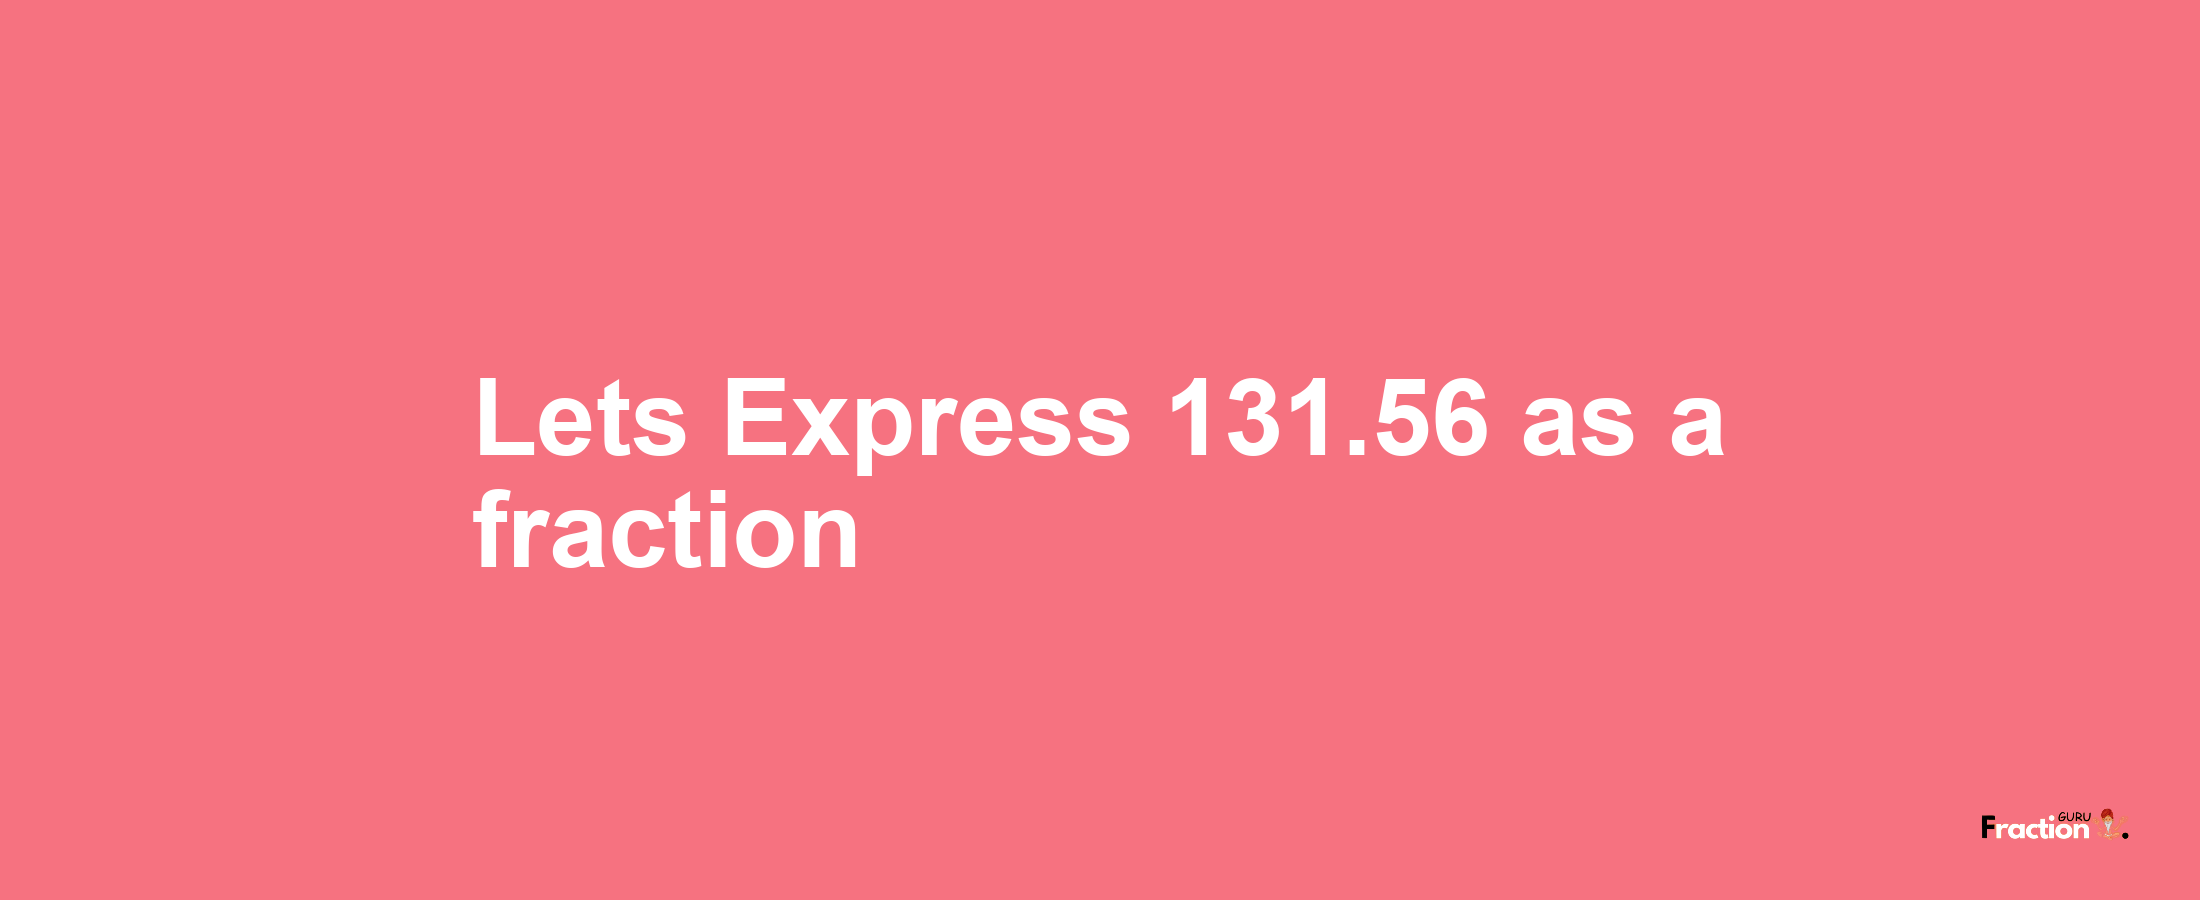 Lets Express 131.56 as afraction